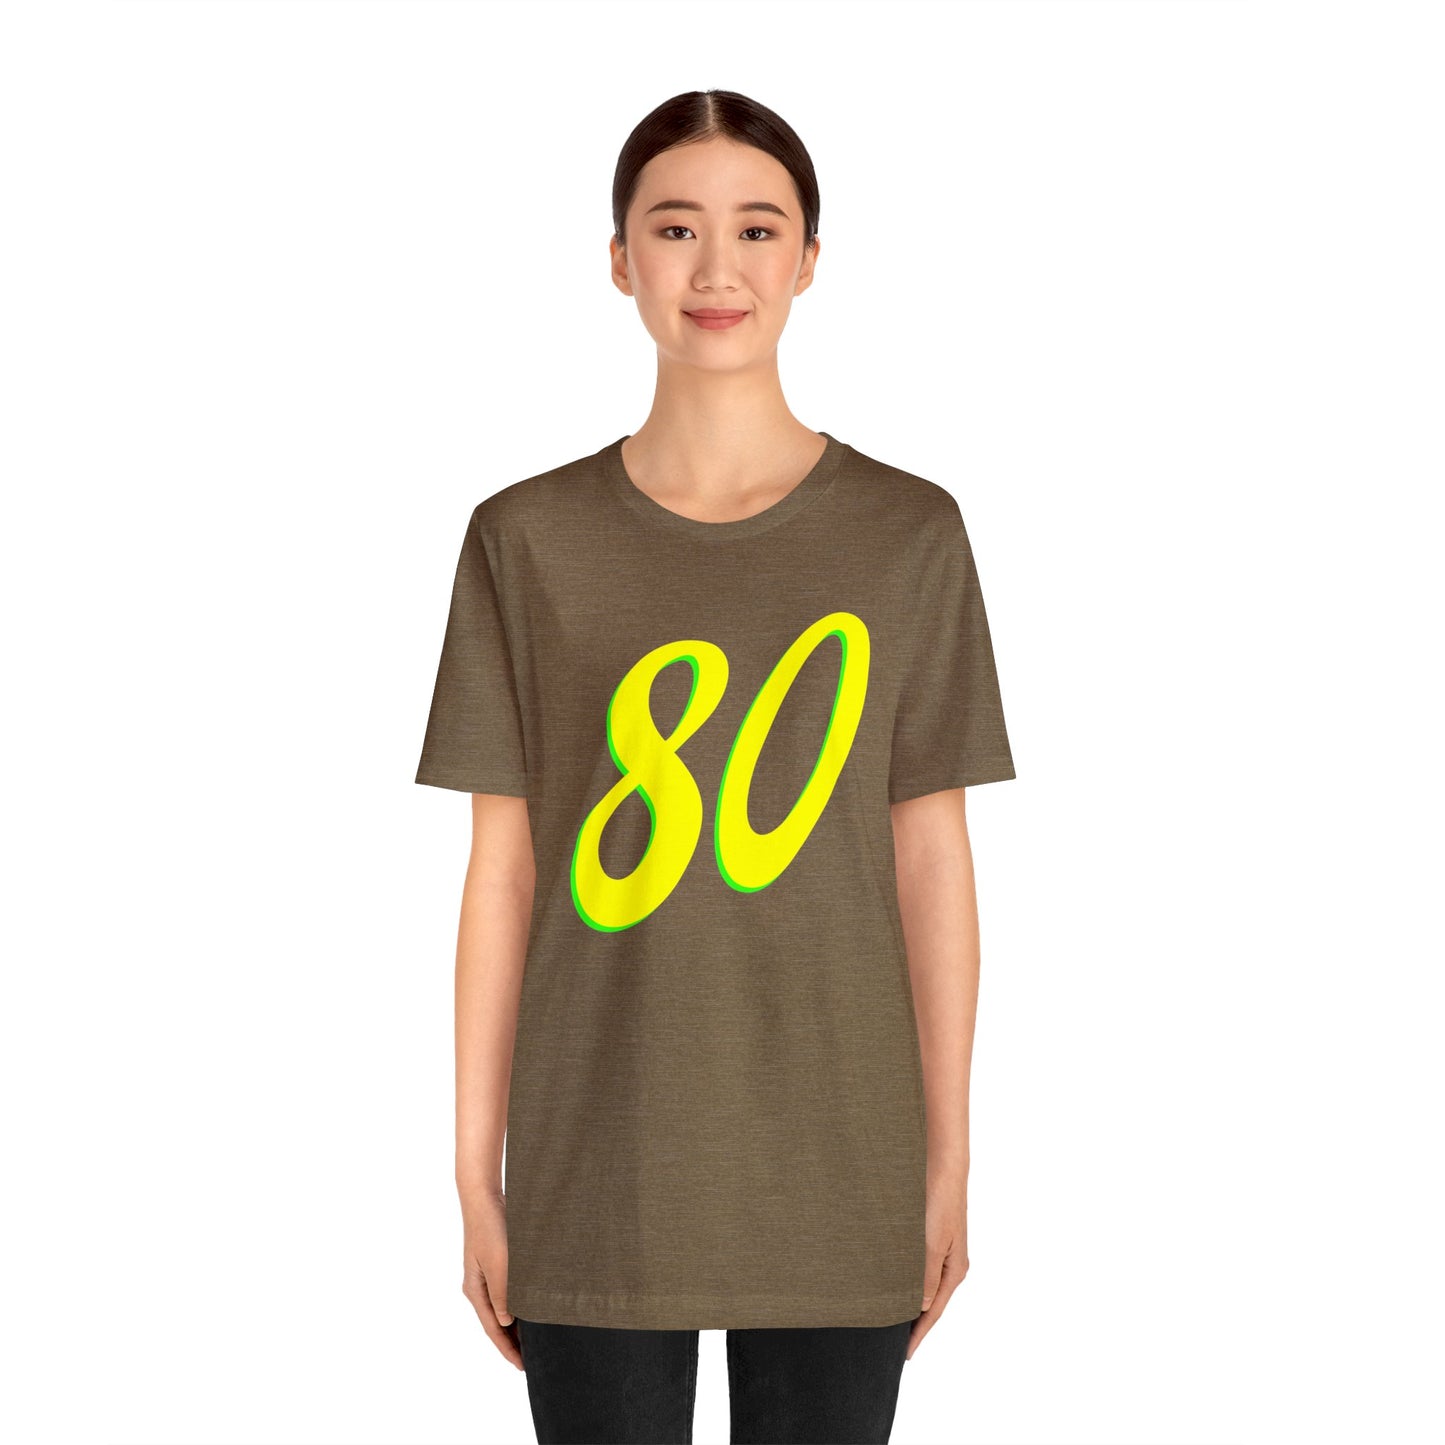 Number 80 Design - Soft Cotton Tee for birthdays and celebrations, Gift for friends and family, Multiple Options by clothezy.com in Asphalt Size Medium - Buy Now